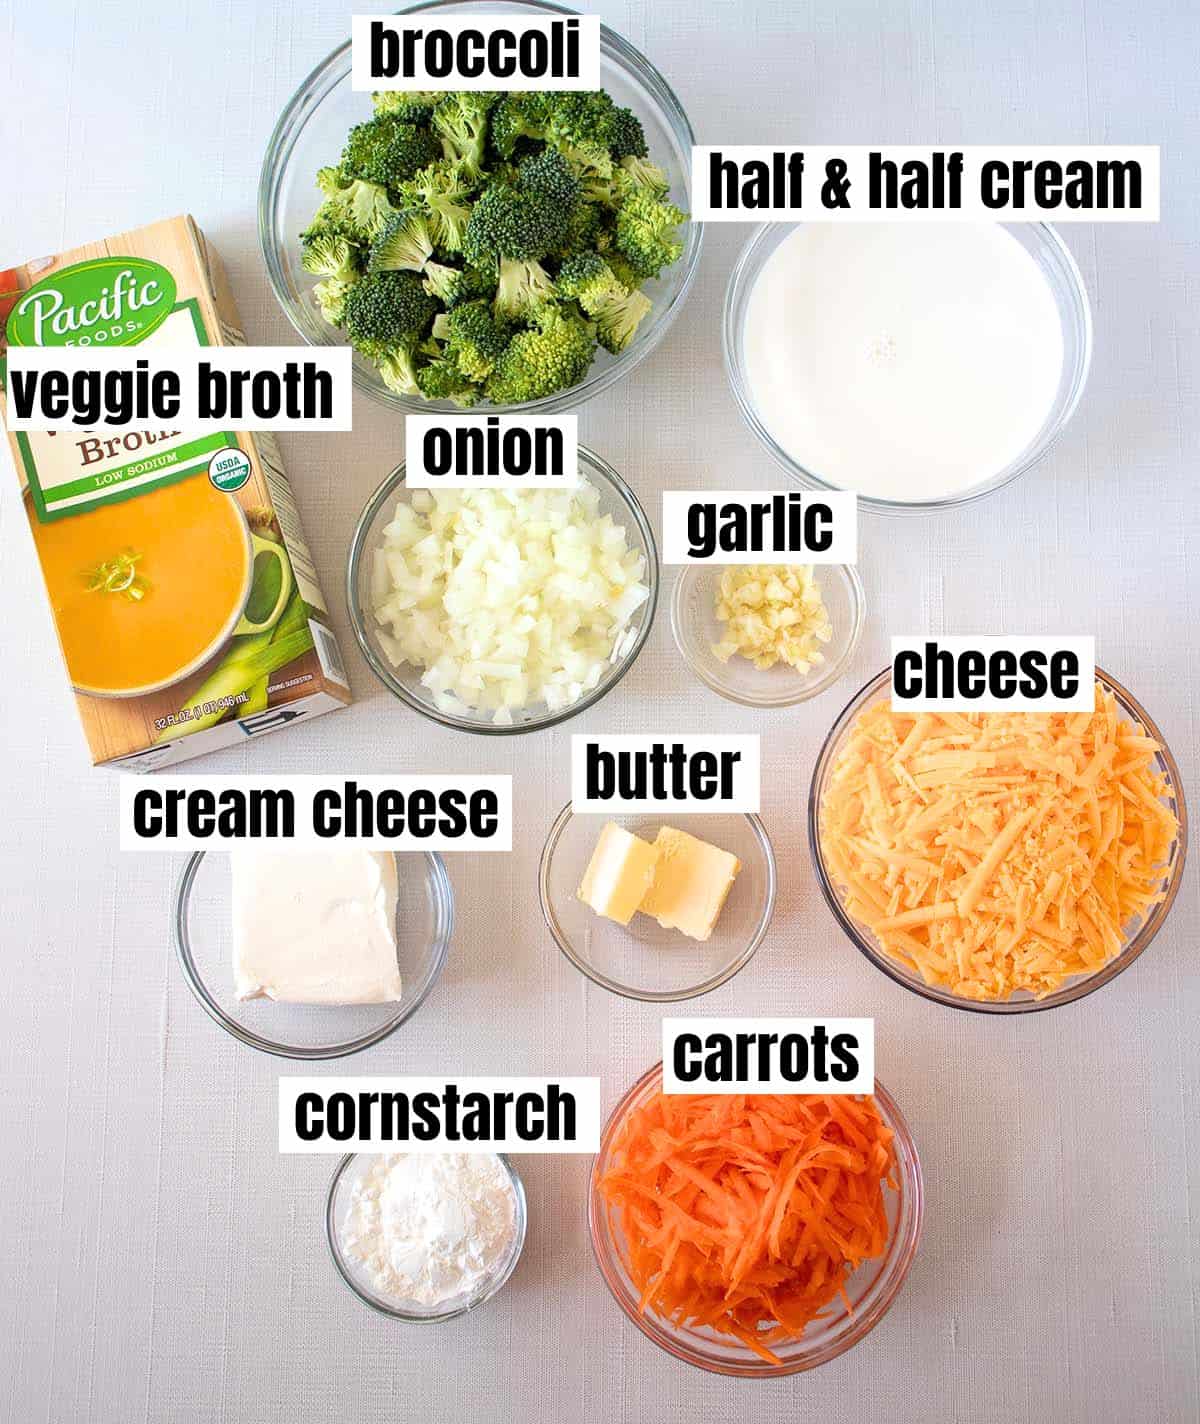 Ingredients in instant pot broccoli cheddar soup which include vegetable broth, broccoli, half & half cream, onions, garlic, cheese, butter, cream cheese, carrots, and cornstarch.